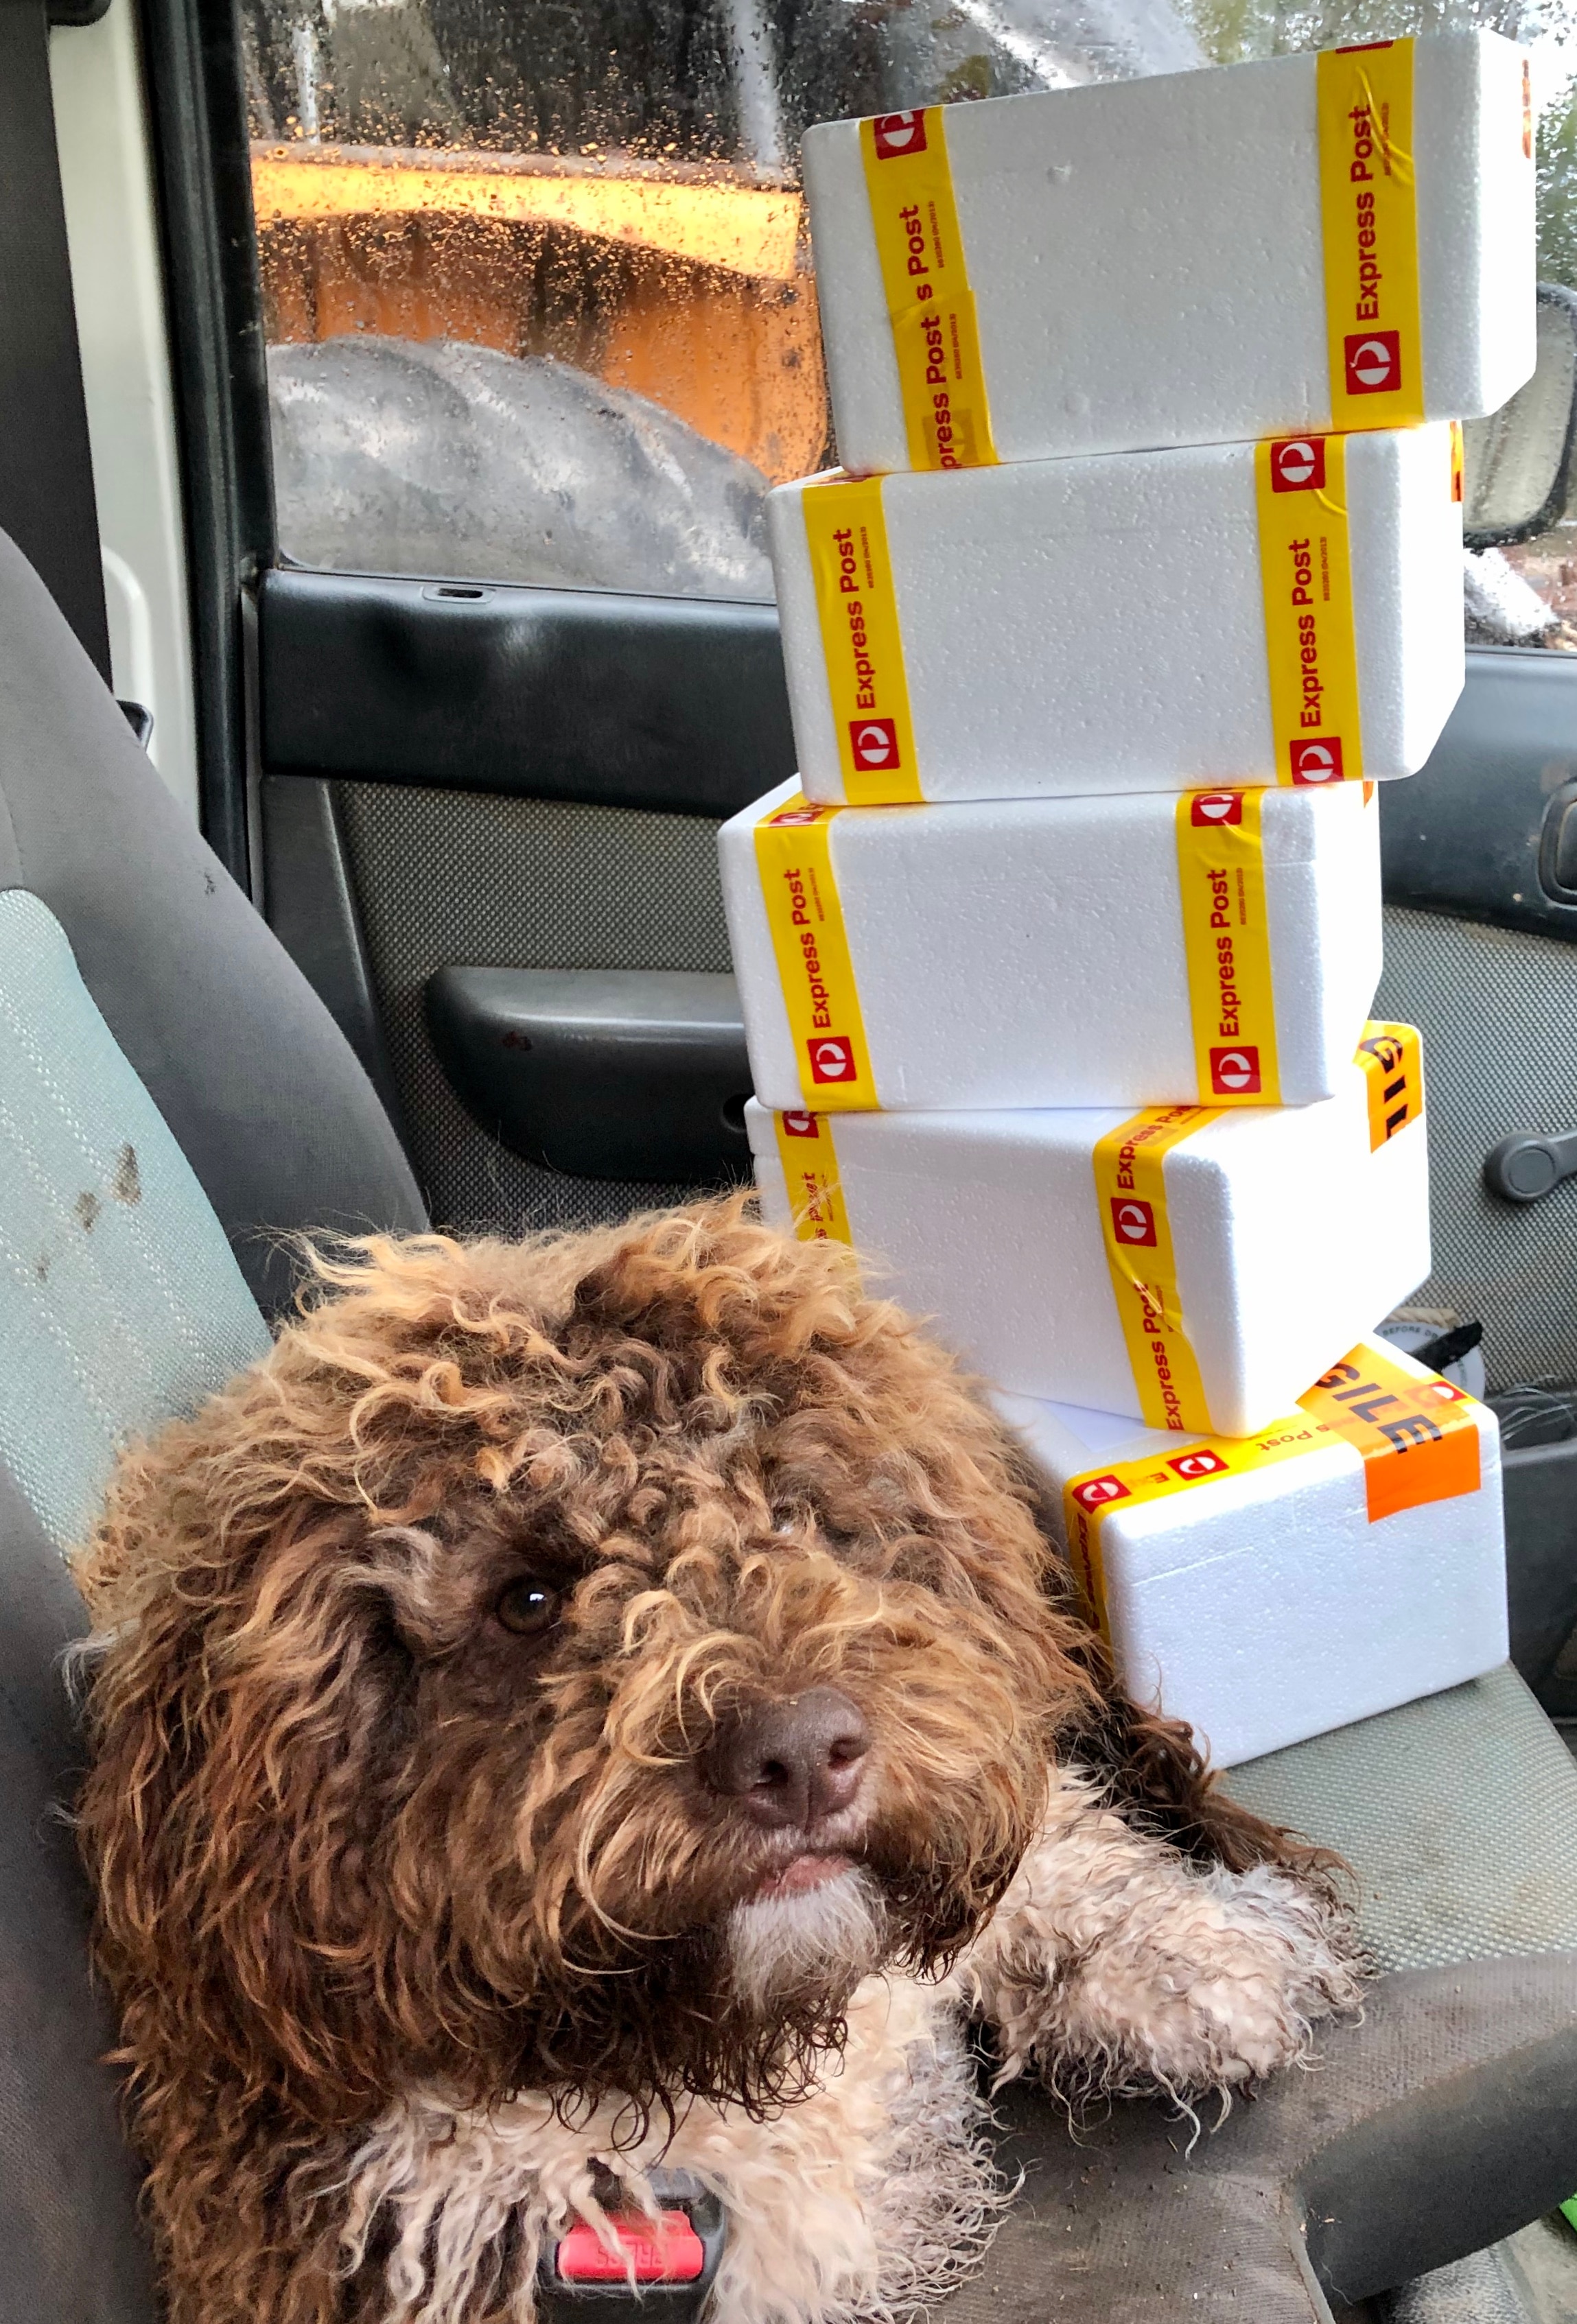 A dog in the cabin of a vehicle next to a stack of parcels.